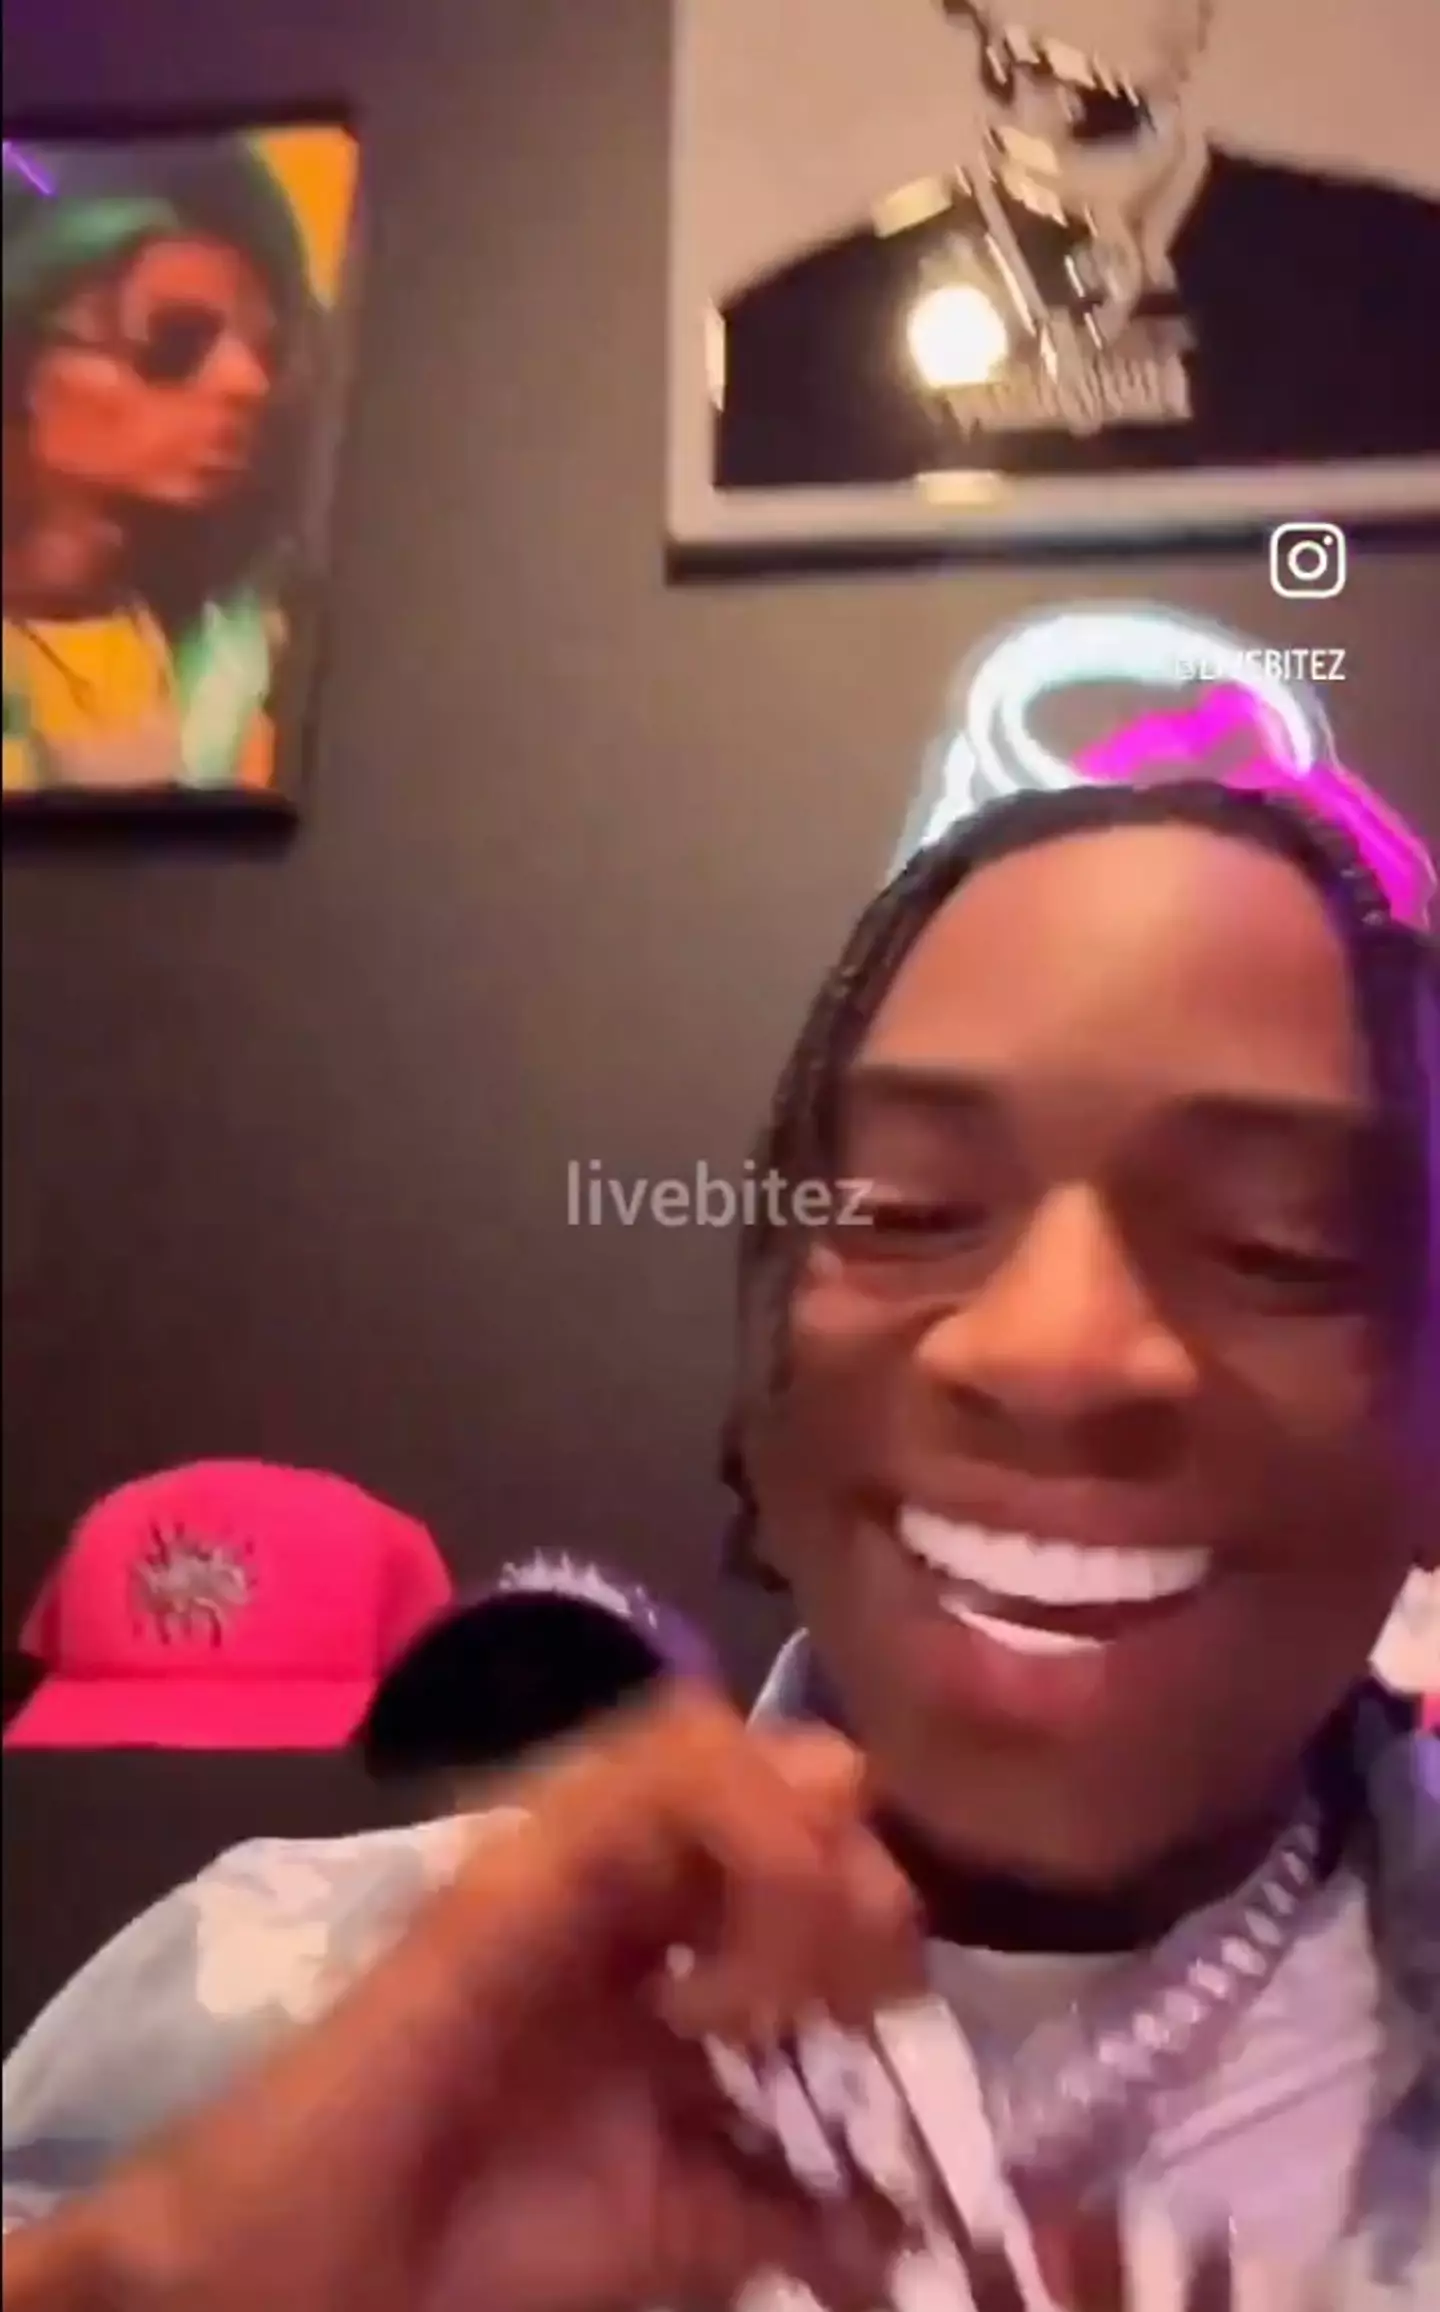 Soulja Boy excitedly announced he is 'retiring' from Instagram.